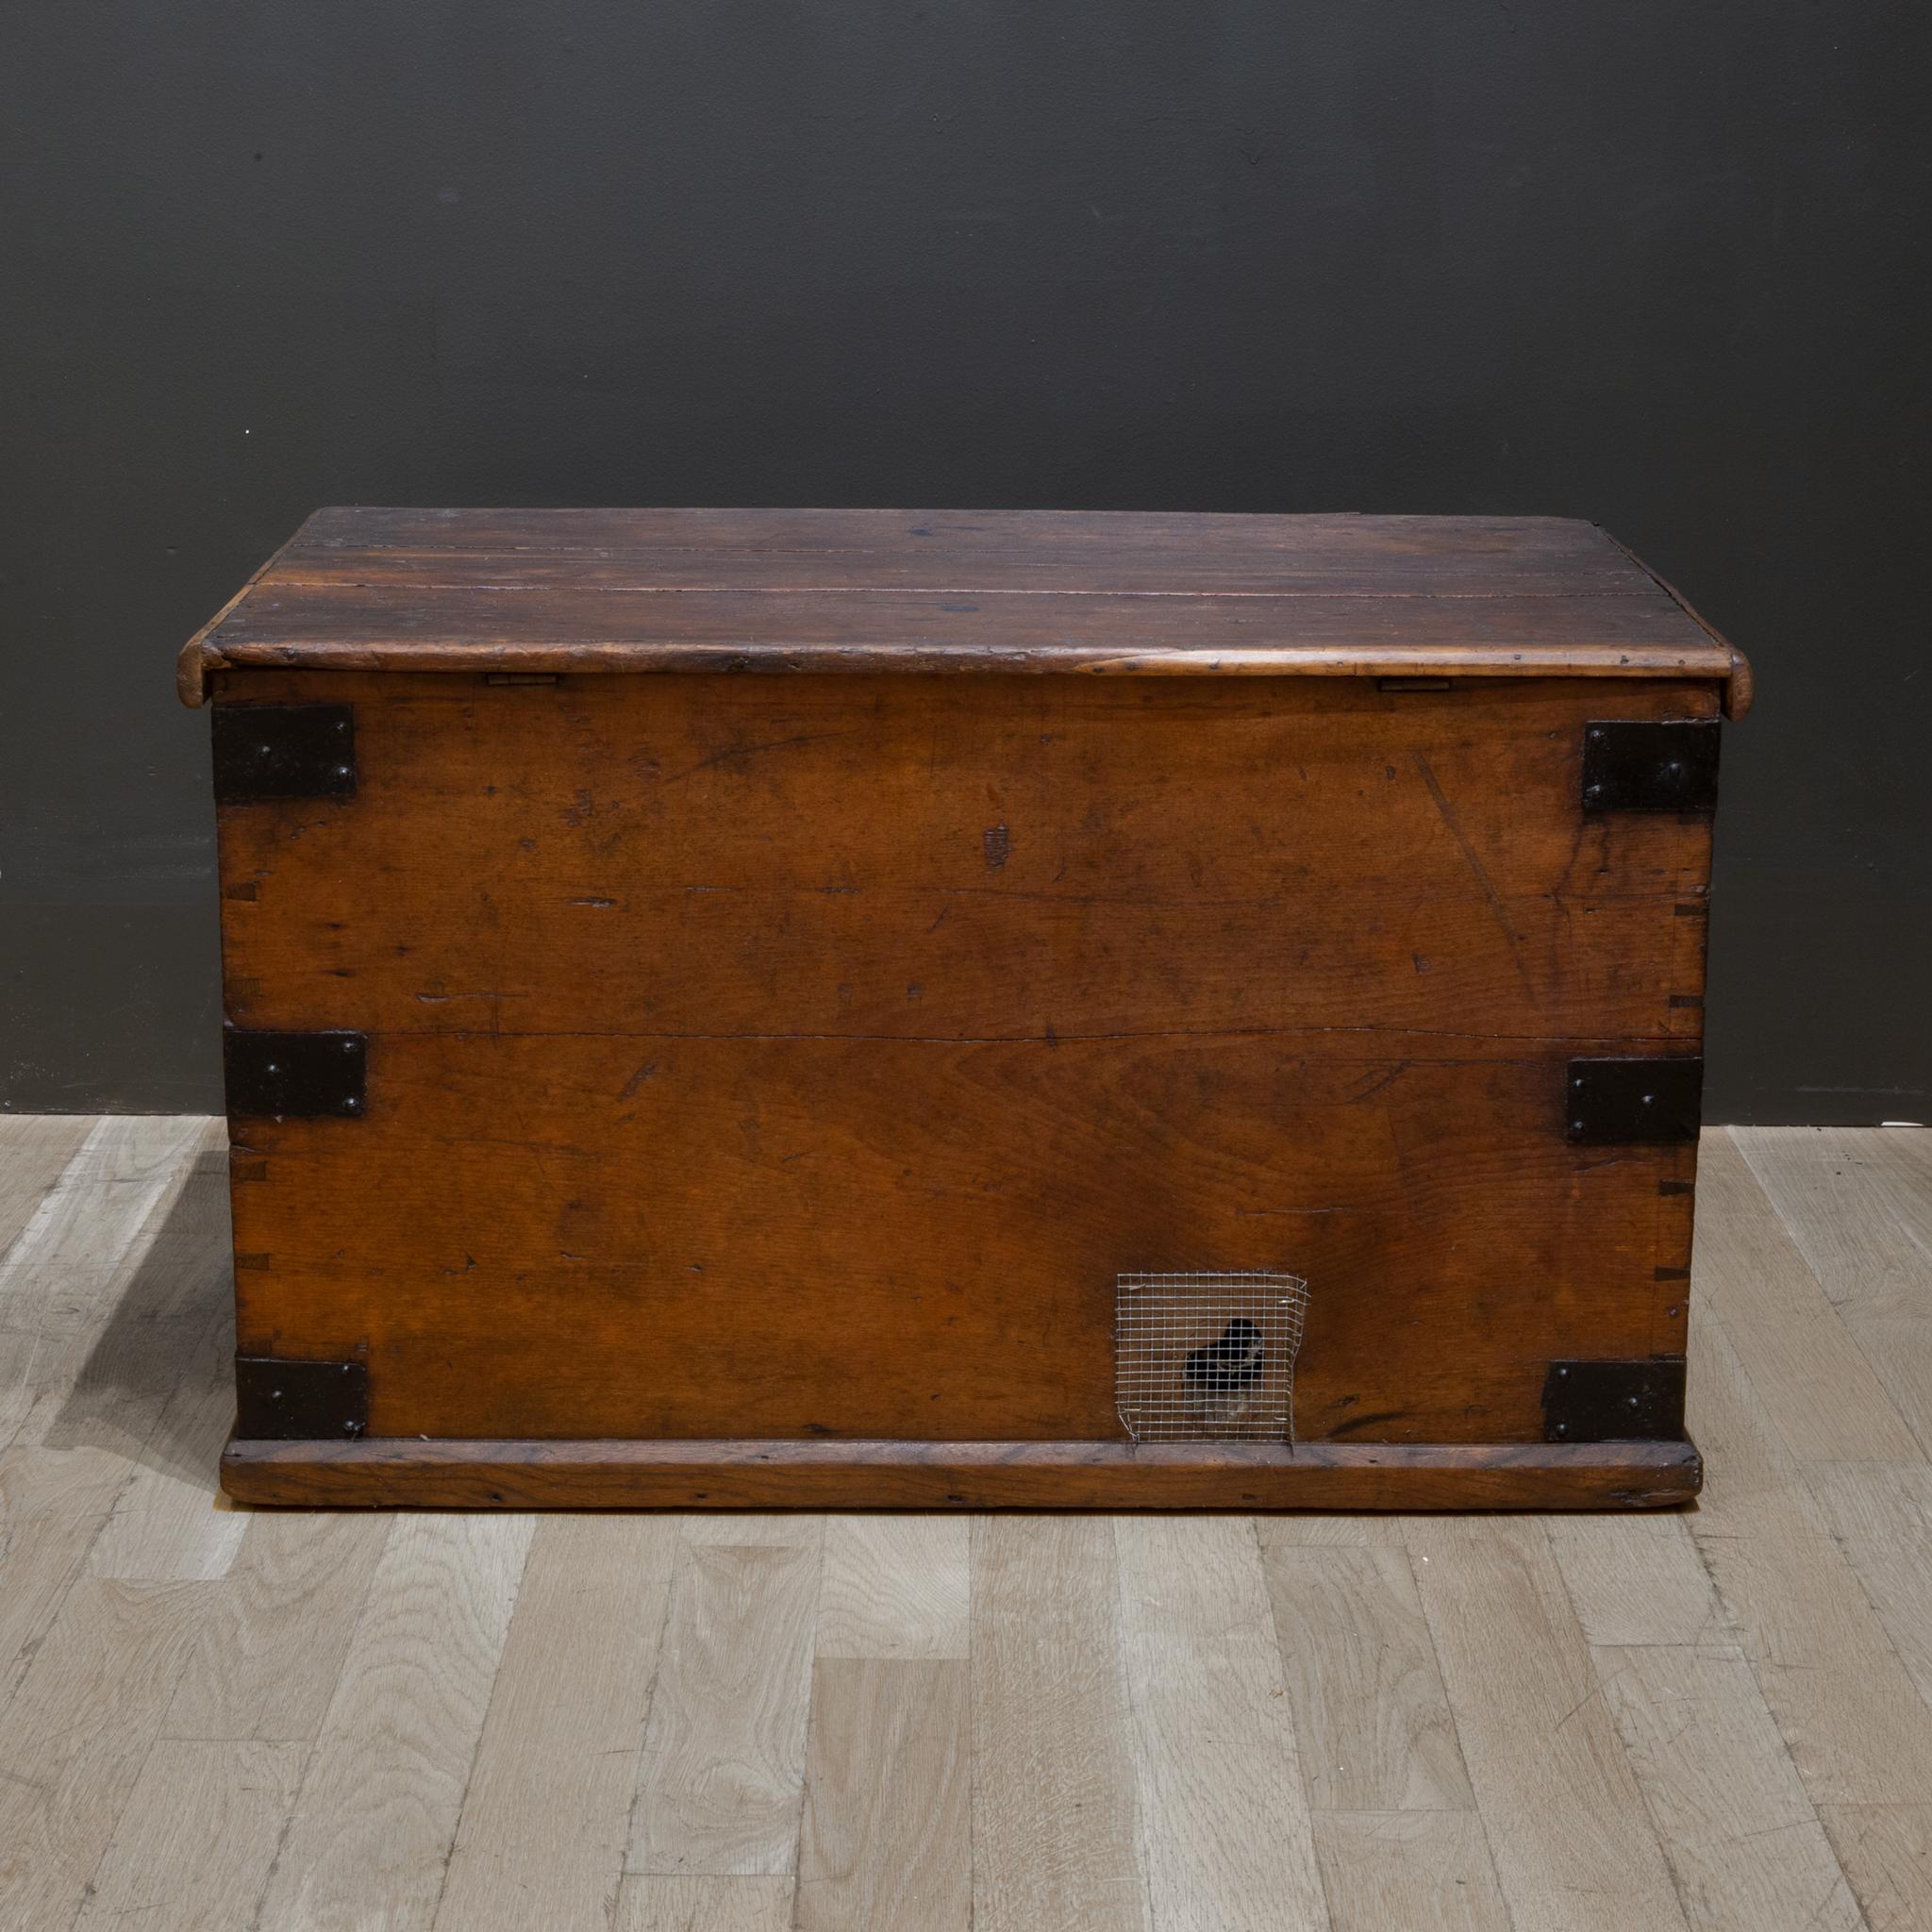 Late 19th / Early 20th C. Blanket Chest, c.1880-1920 1